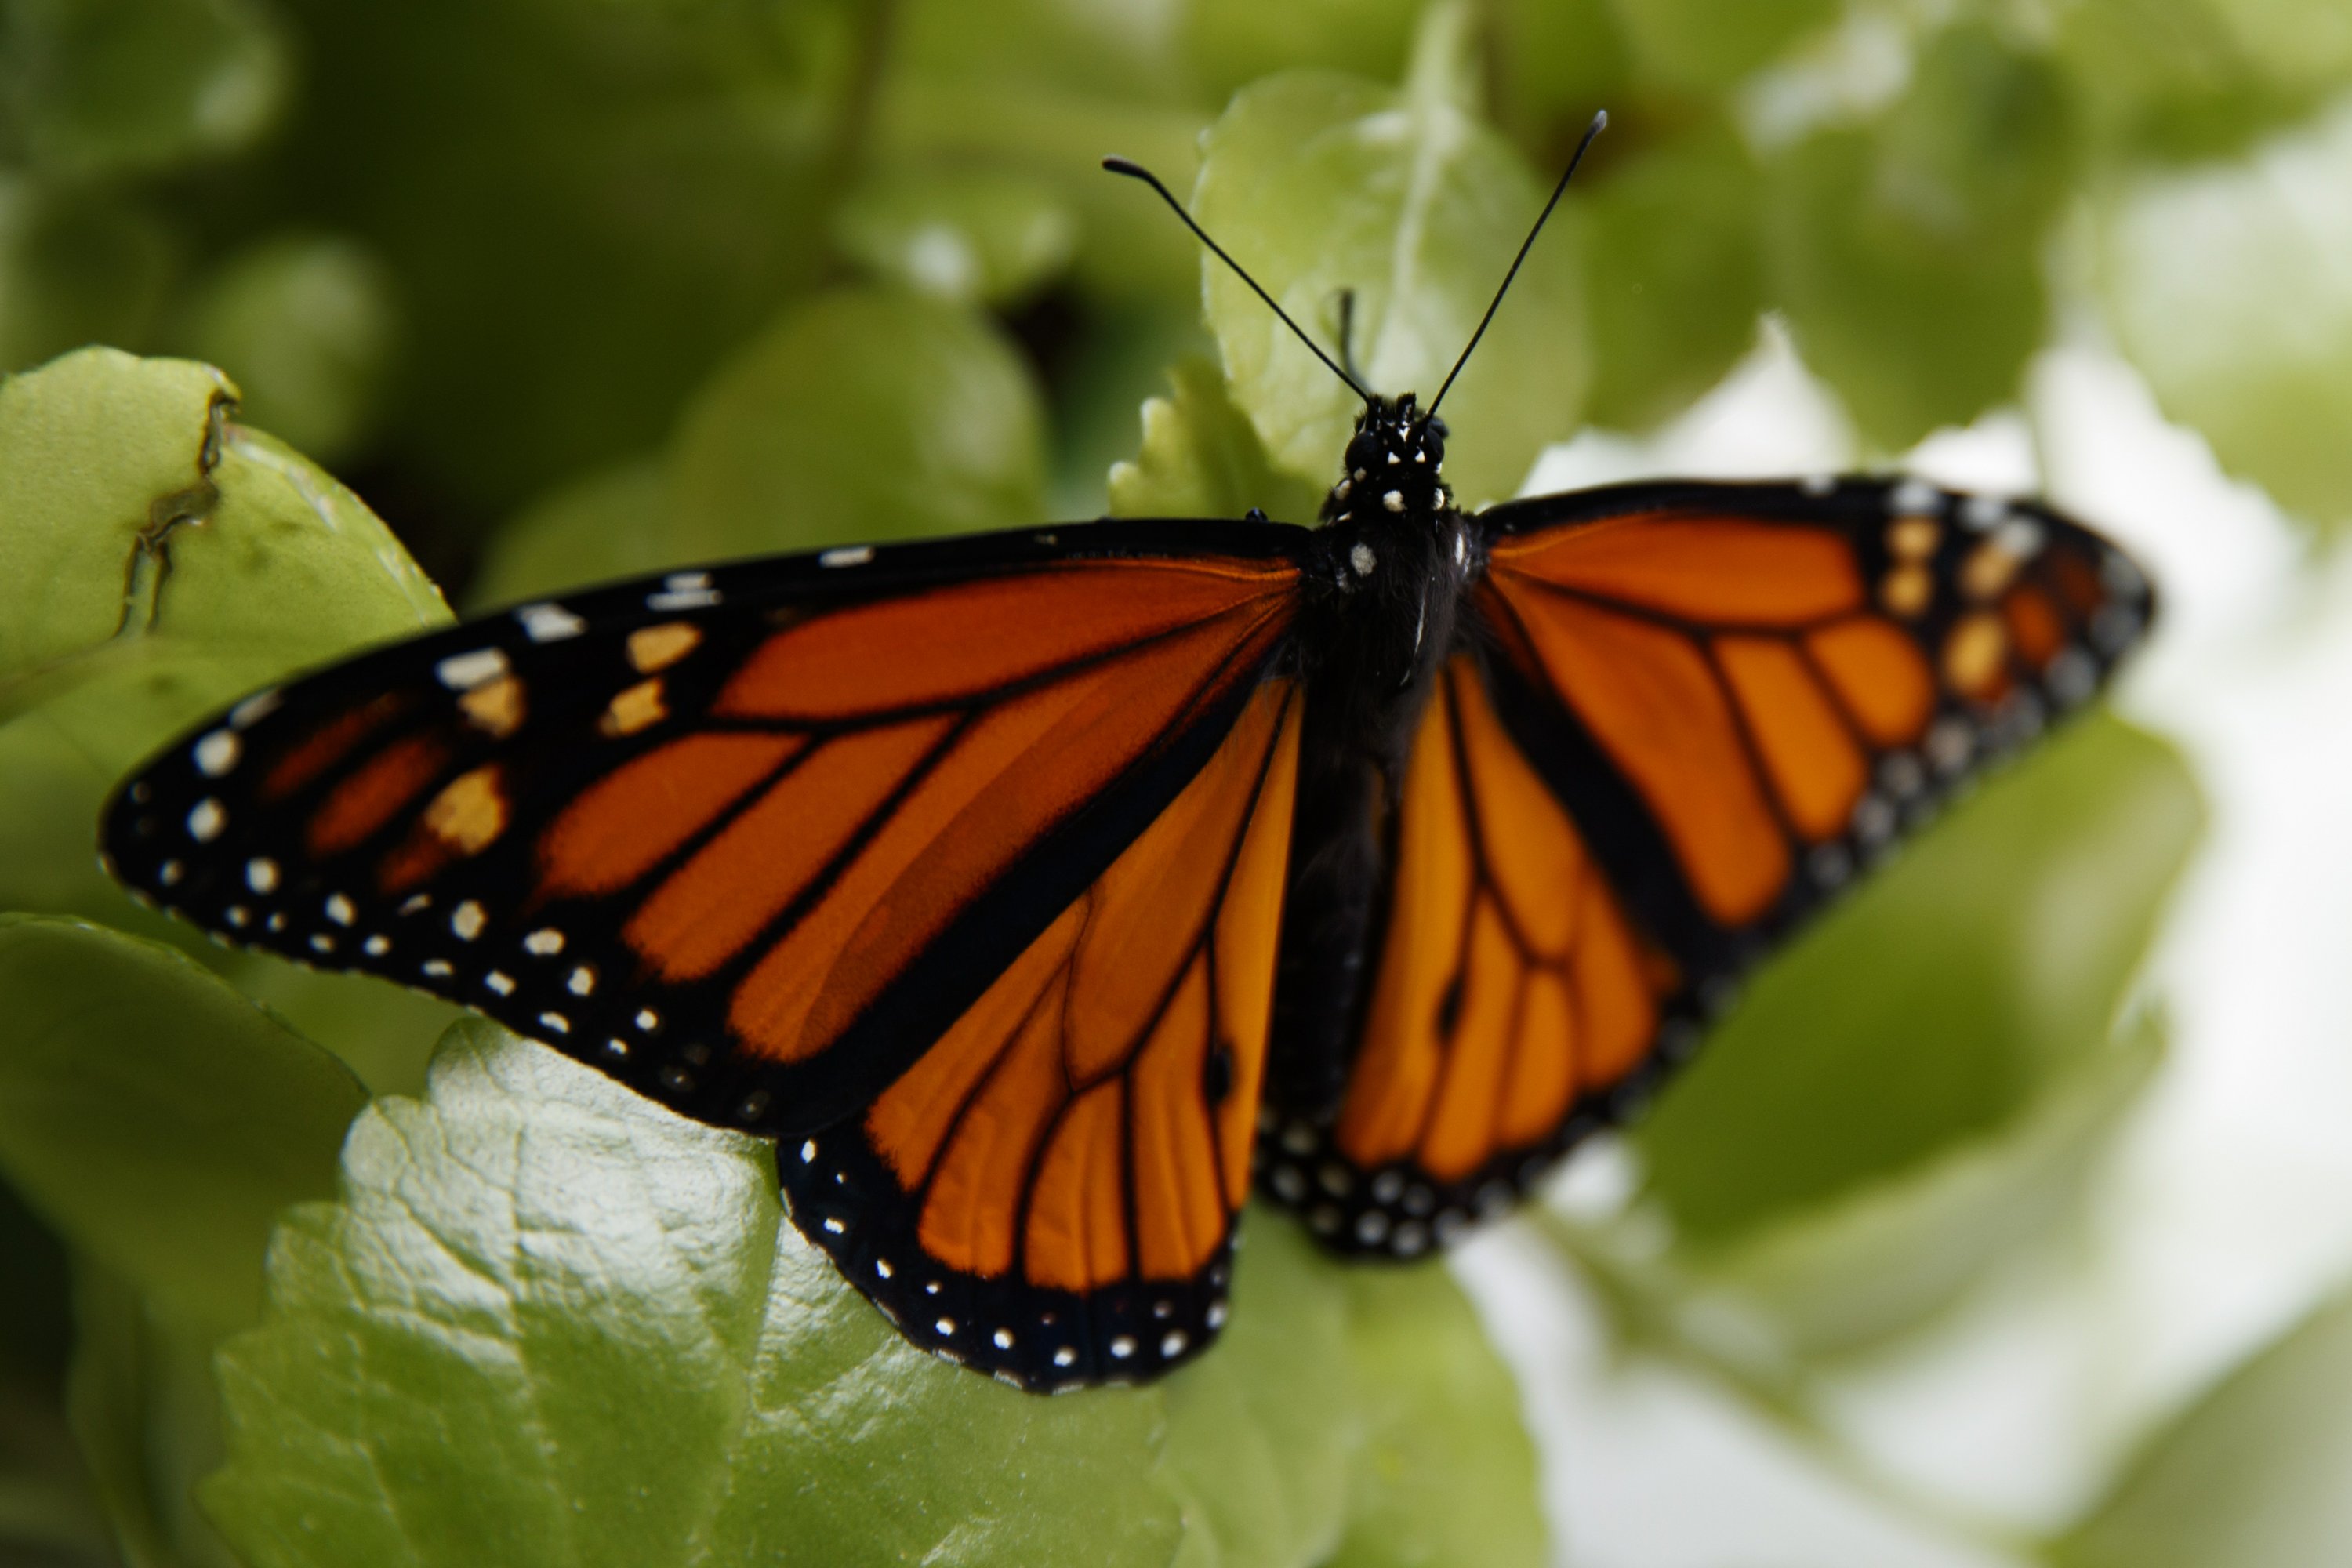 Feds To Delay Seeking Legal Protection For Monarch Butterfly The 